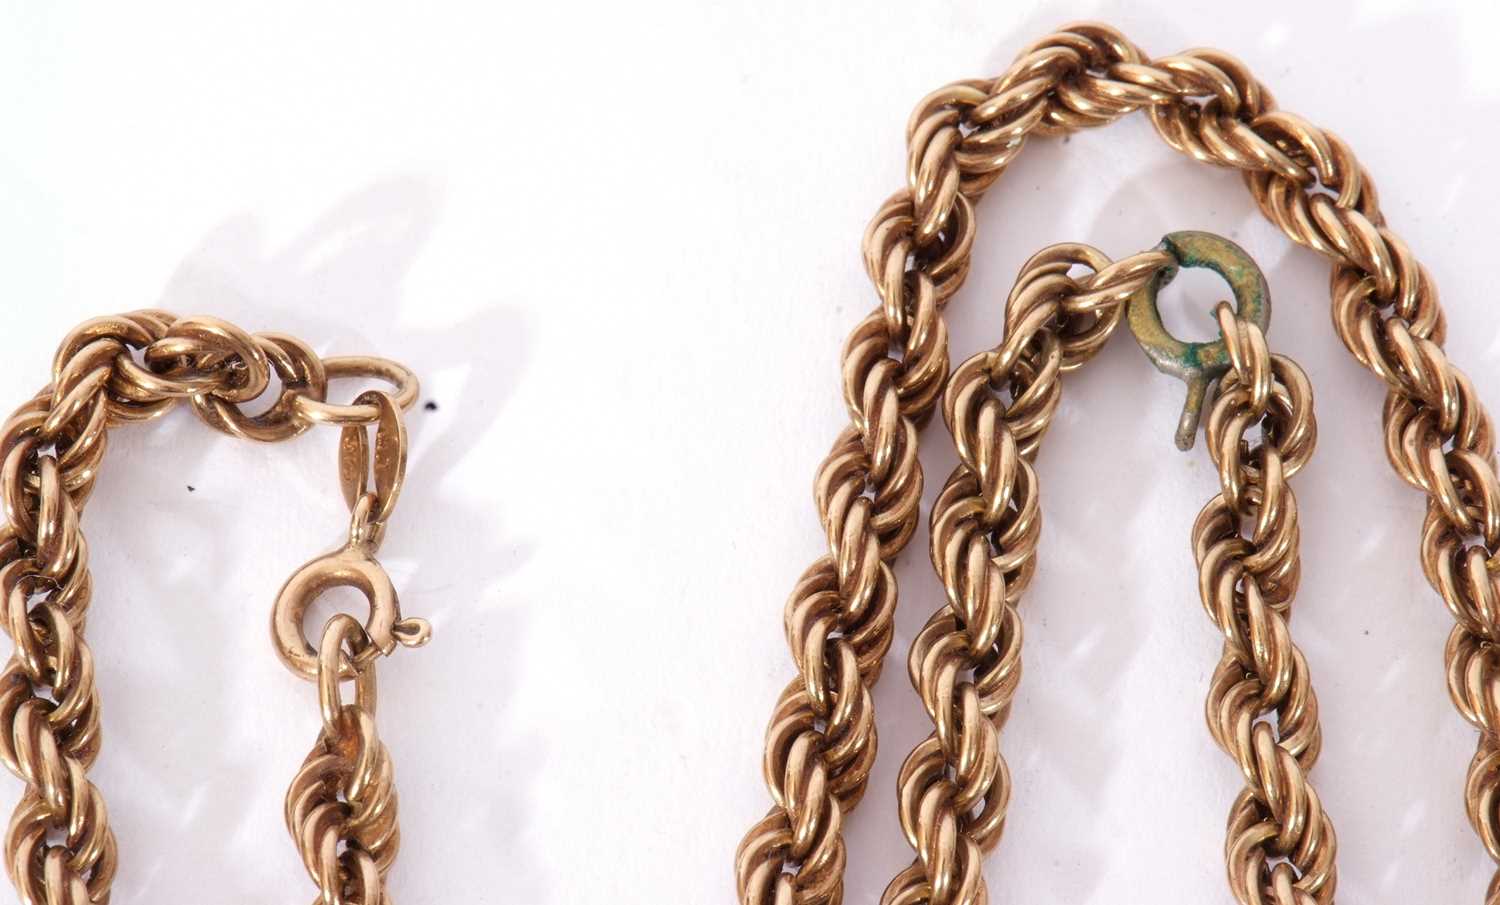 9ct gold rope twist chain (broken) suspending a 9ct gold ring, g/w 13.8gms - Image 3 of 4